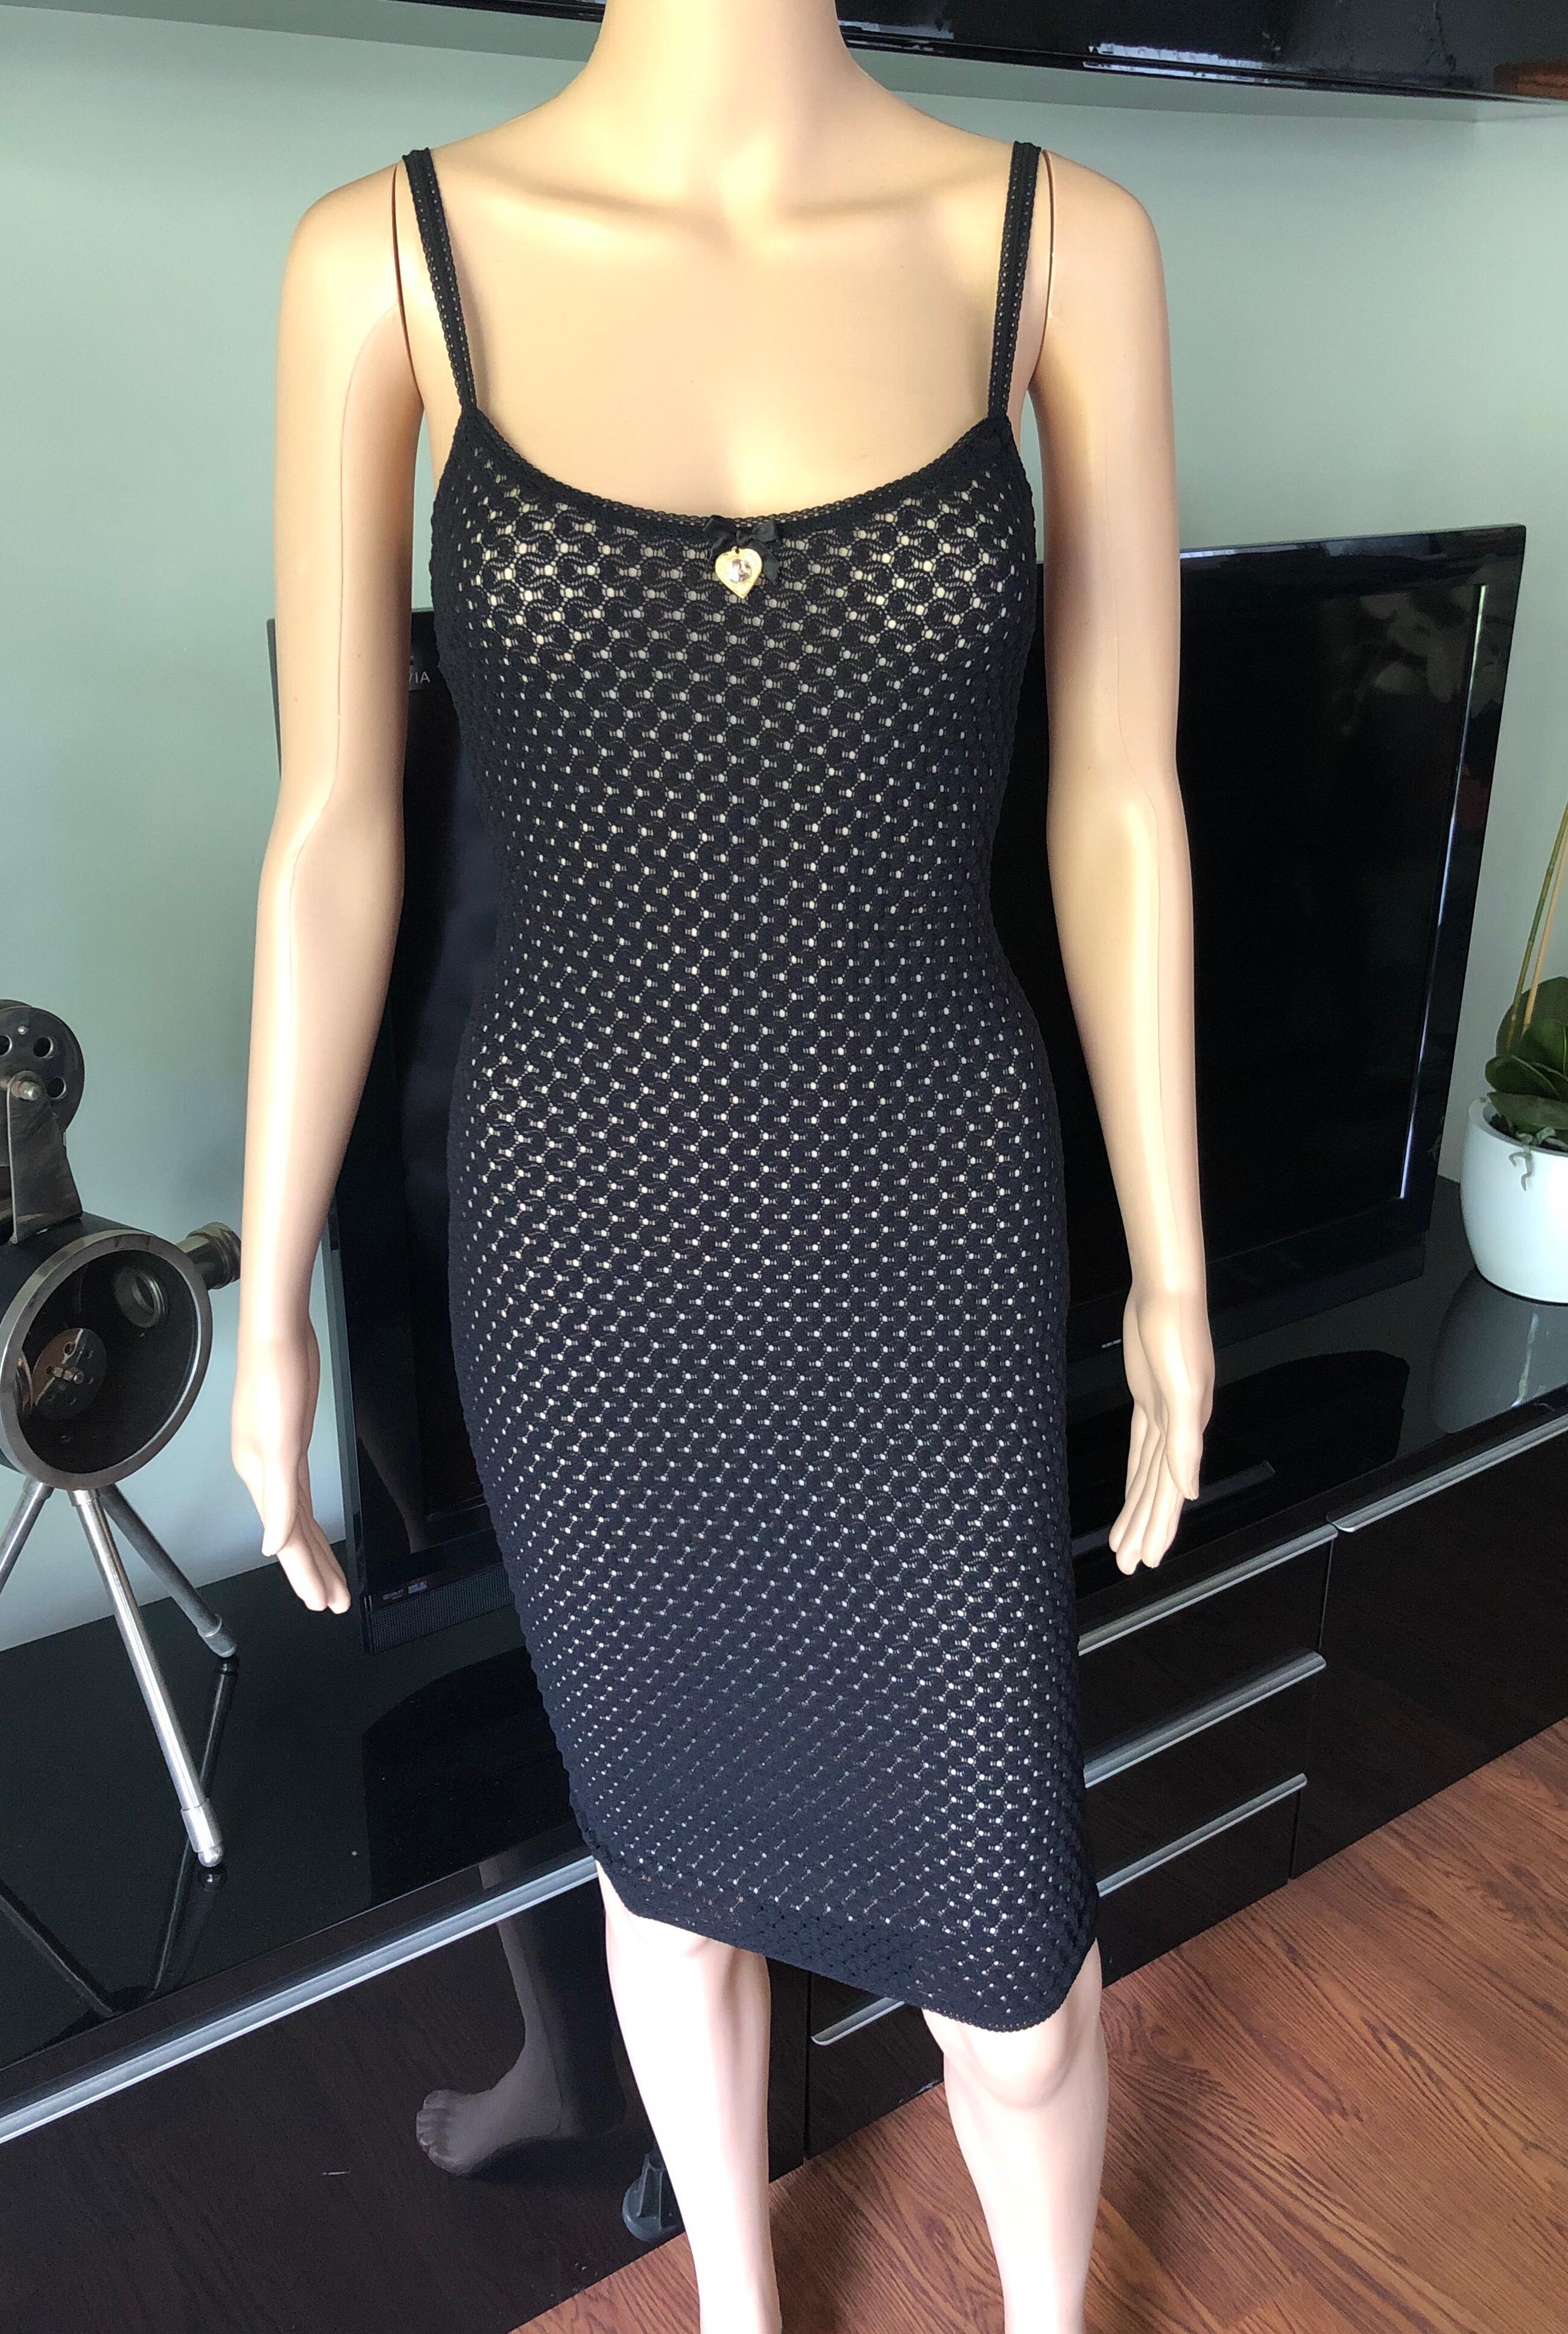 1990's D&G by Dolce & Gabbana Sheer Knit Fishnet Mesh Black Dress w Virgin Mary Charm IT 38

D&G by Dolce & Gabbana mesh knit mini dress with scoop neckline, embellished virgin mary charm accent at bust and slip underlay.